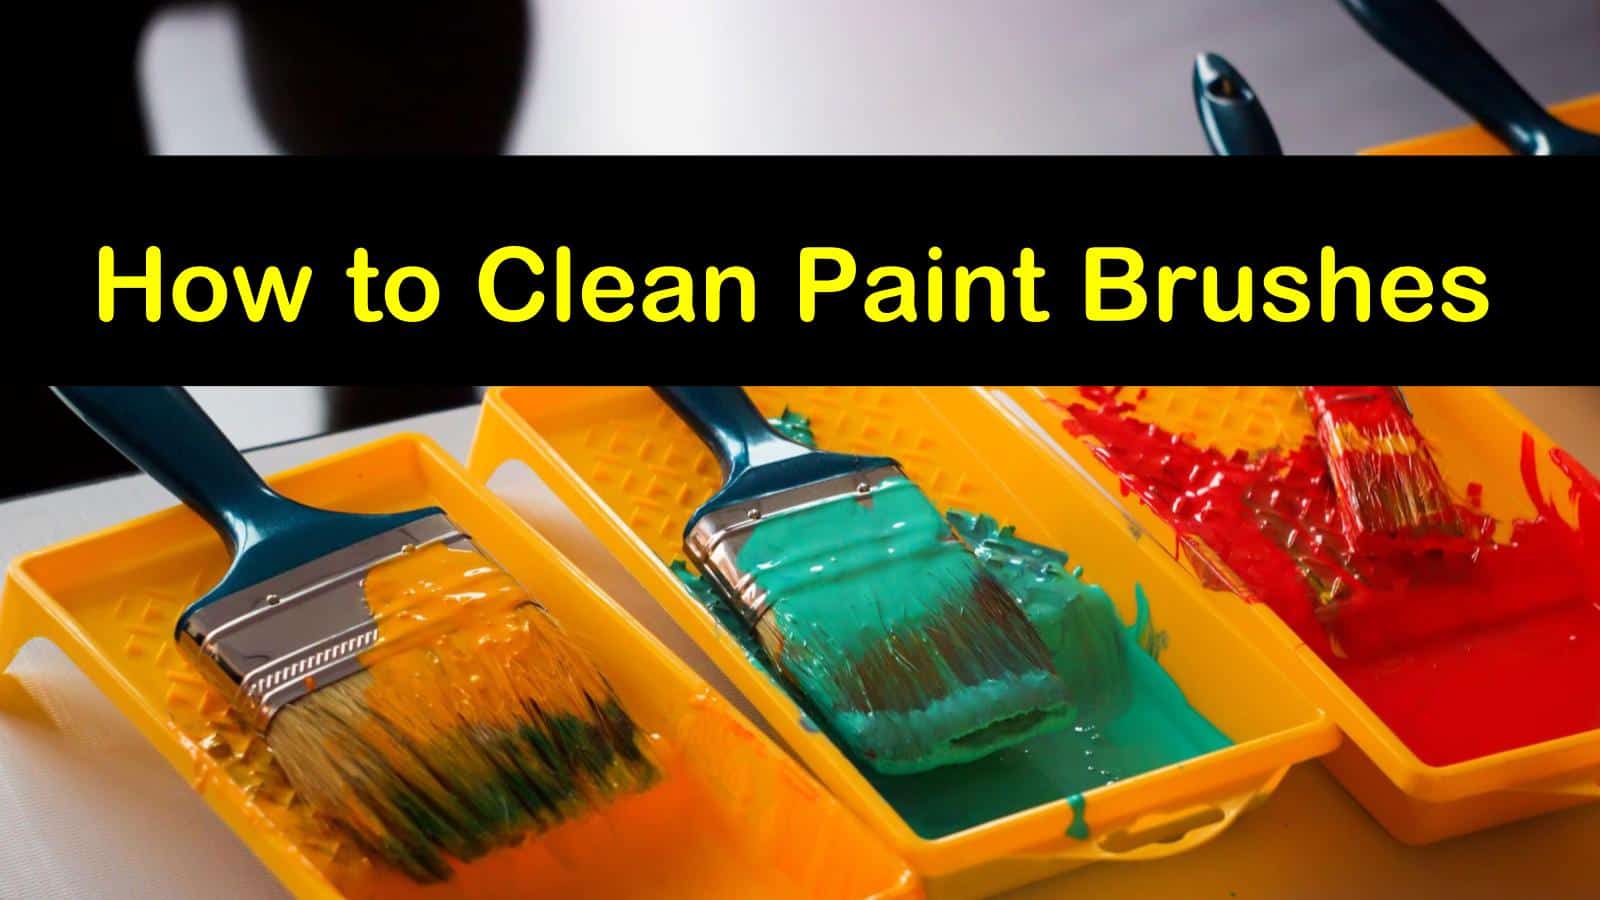 cleaning a paintbrush with paint thinner